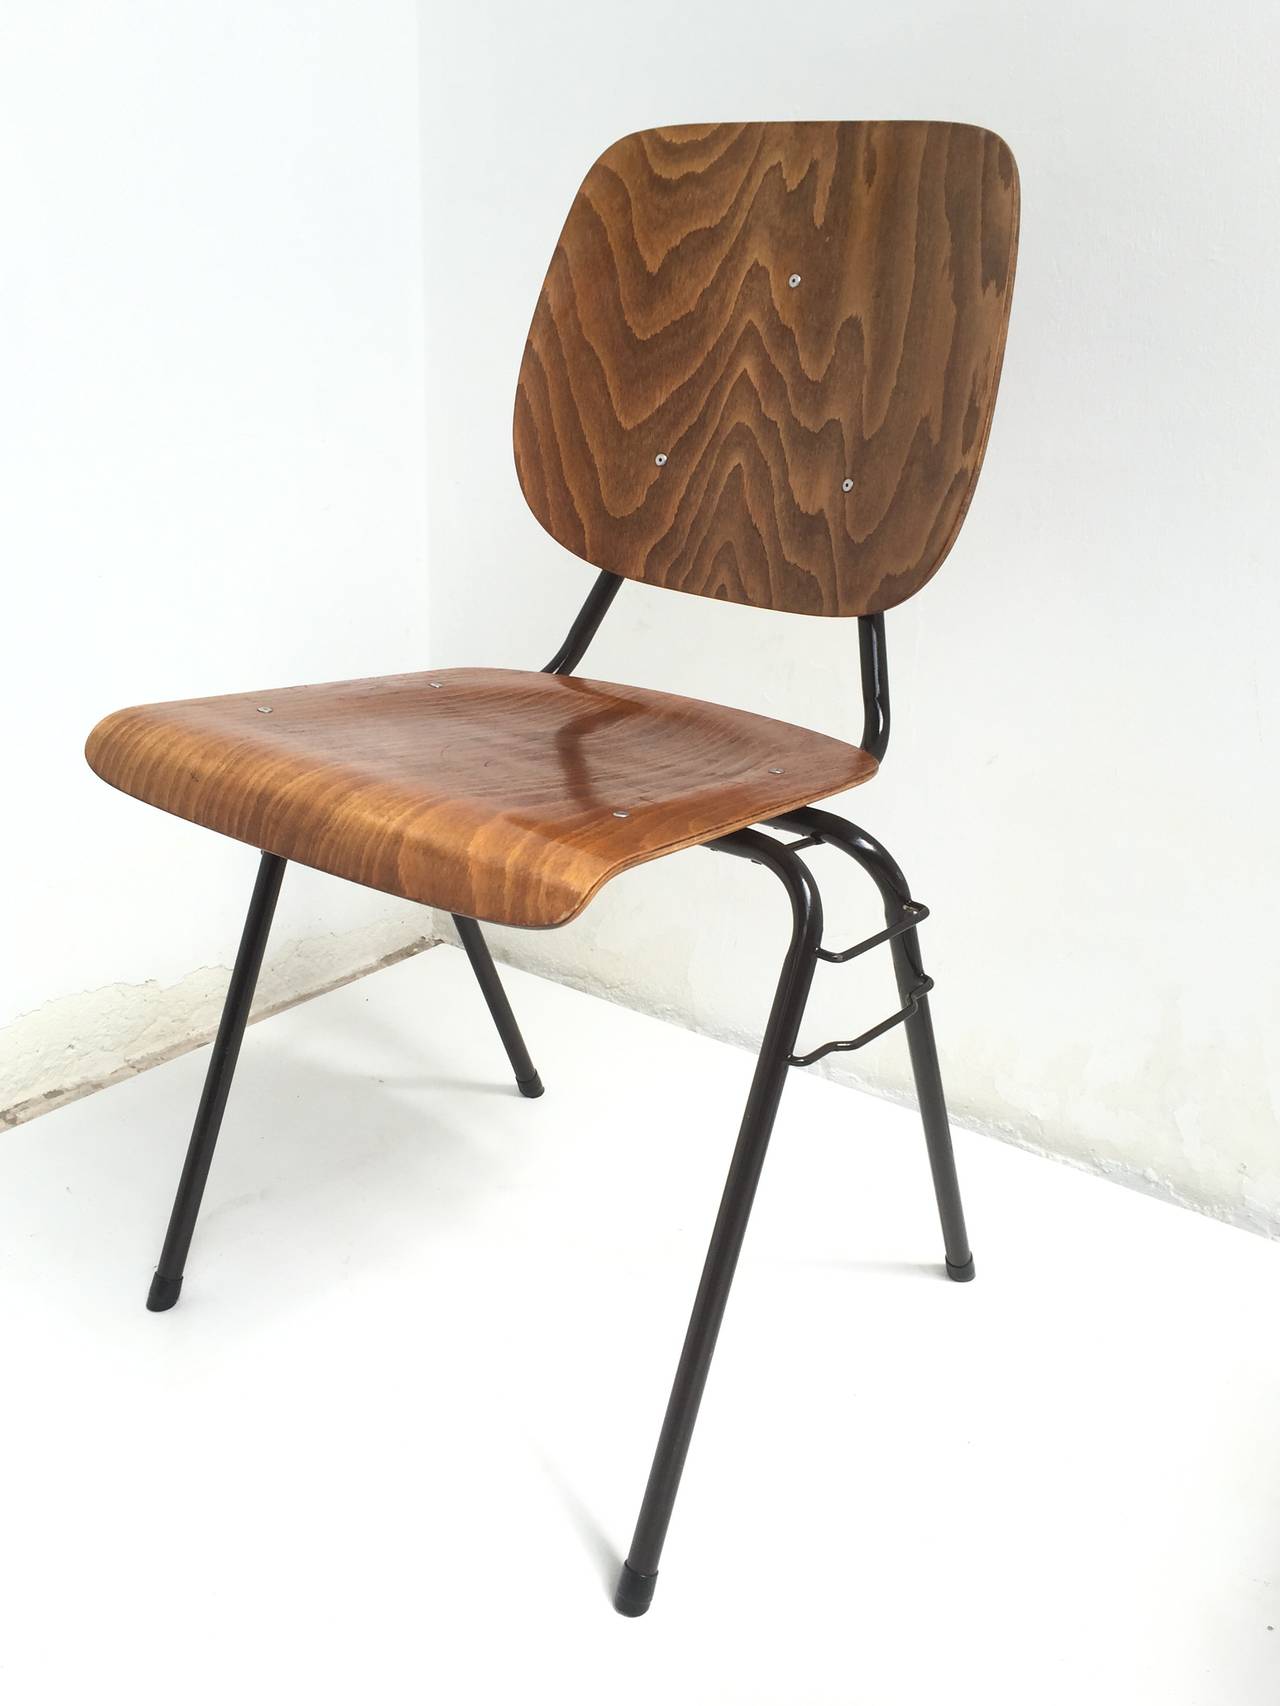 These Model 305 chairs where designed in 1957 by important Dutch pioneer designer Kho Liang Ie for CAR industry Katwijk The Netherlands

This version was purchased in 1963 and has also the link option to make rows of chairs connected in for